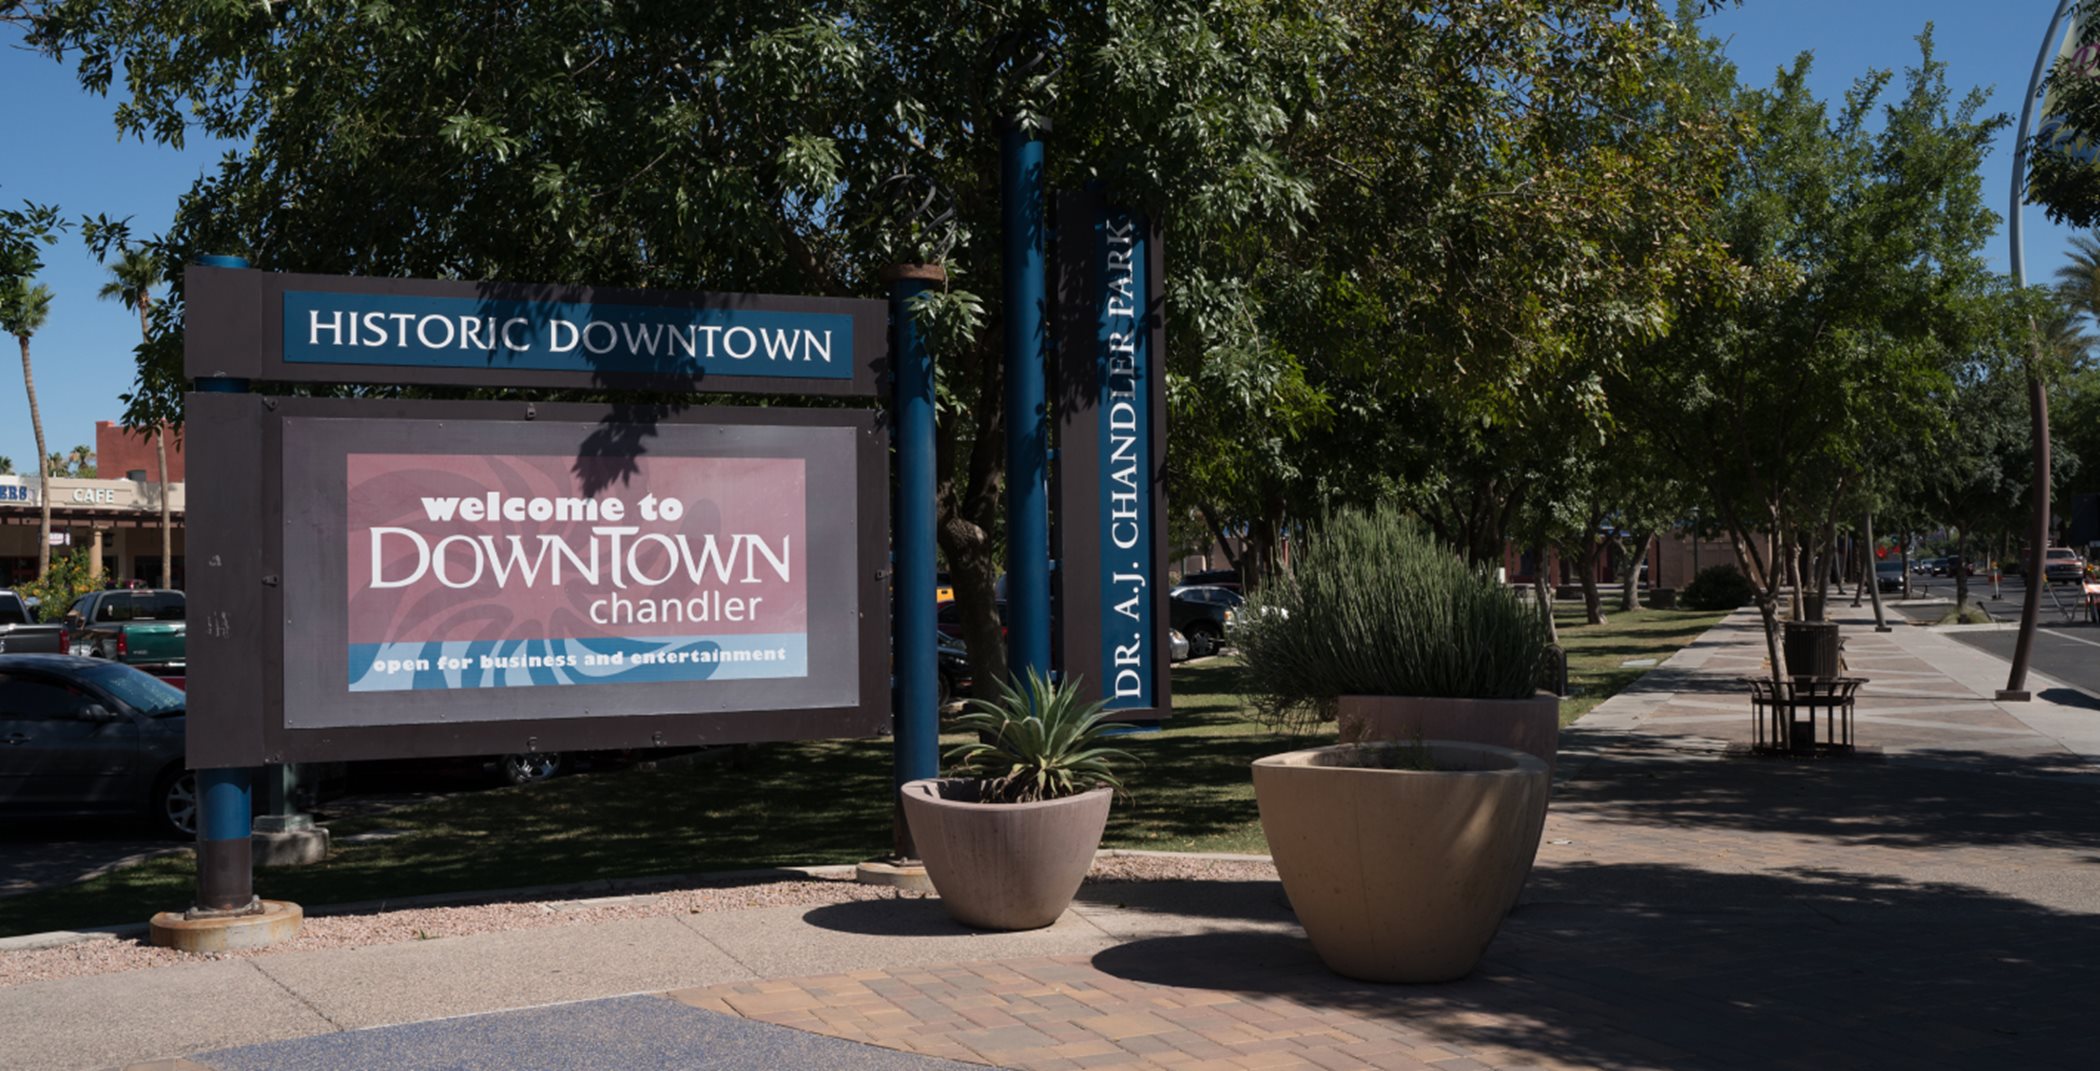 Downtown Chandler welcome sign. It reads; "Historic Downtown. Welcome to Downtown Chandler. Open for business and entertainment."